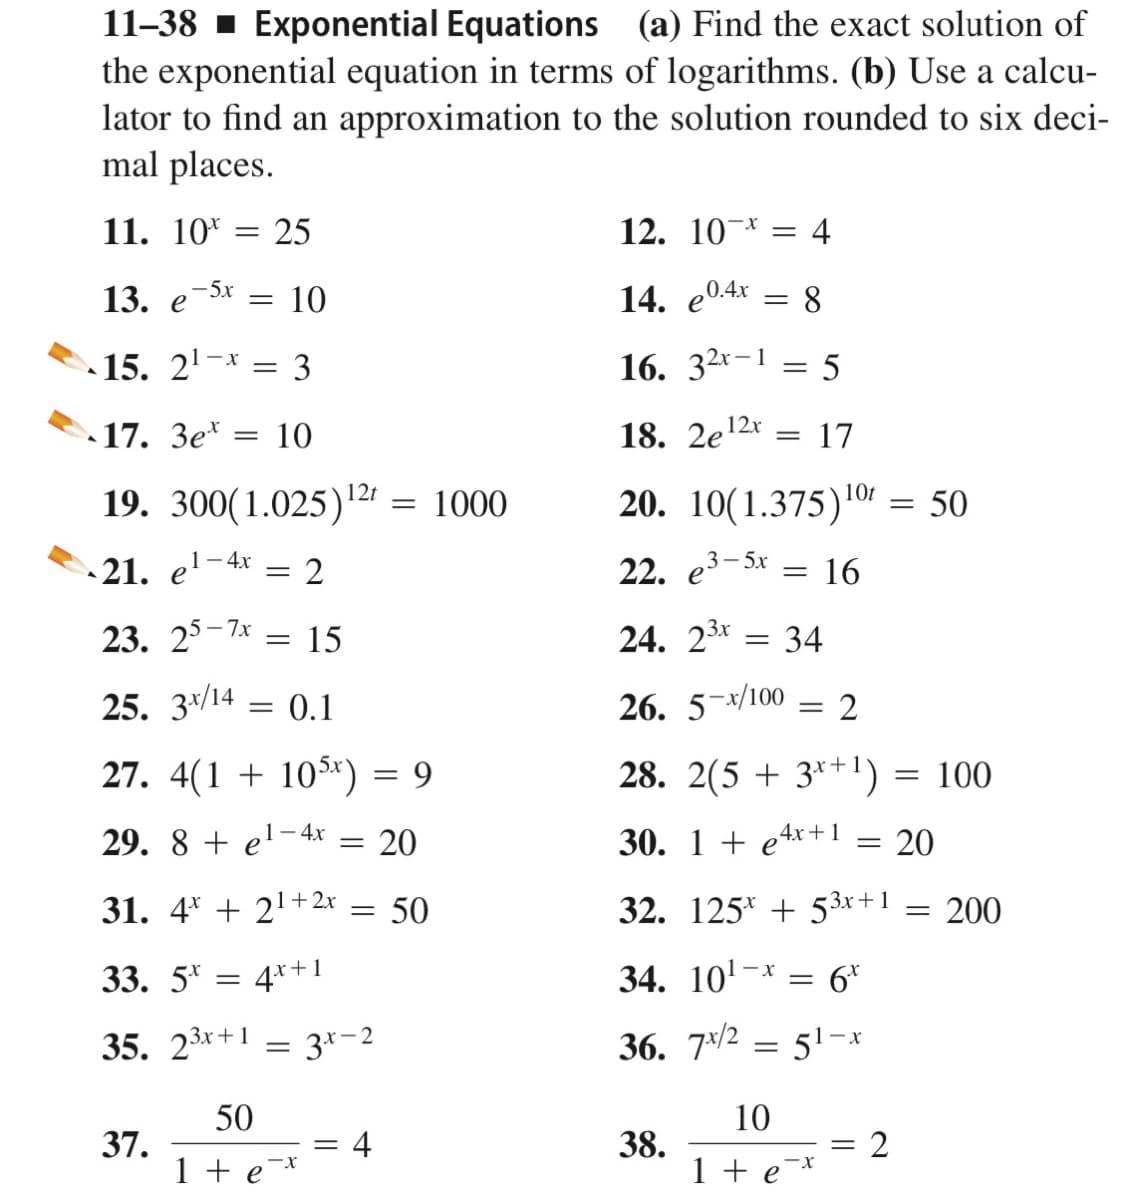 11-38 - Exponential Equations (a) Find the exact solution of
the exponential equation in terms of logarithms. (b) Use a calcu-
lator to find an approximation to the solution rounded to six deci-
mal places.
11. 10*
25
12. 10-* = 4
13. е
-5x
10
14. e04x
8
15. 2'-* = 3
16. 32*-1 = 5
17. 3e*
10
18. 2e12r
17
19. 300(1.025)2r
12t
=
1000
20. 10(1.375)10r = 50
21. e'-4;
22. e3-5x
16
23. 25-7к
15
24. 23x
34
25. 3*/14
0.1
26. 5-x/100
= 2
27. 4(1 + 105*) = 9
28. 2(5 + 3*+!) = 100
29. 8 + e'-4x
20
30. 1 + e4r+1 = 20
31. 4* + 21+2r
50
32. 125* + 53x+1
200
1
33. 5* = 4*+
34. 10'-x
: 6*
35. 23x+1 = 3*-2
36. 7×/2
51-x
10
37.
1 + e¯*
4
38.
1 + e¯*
50
